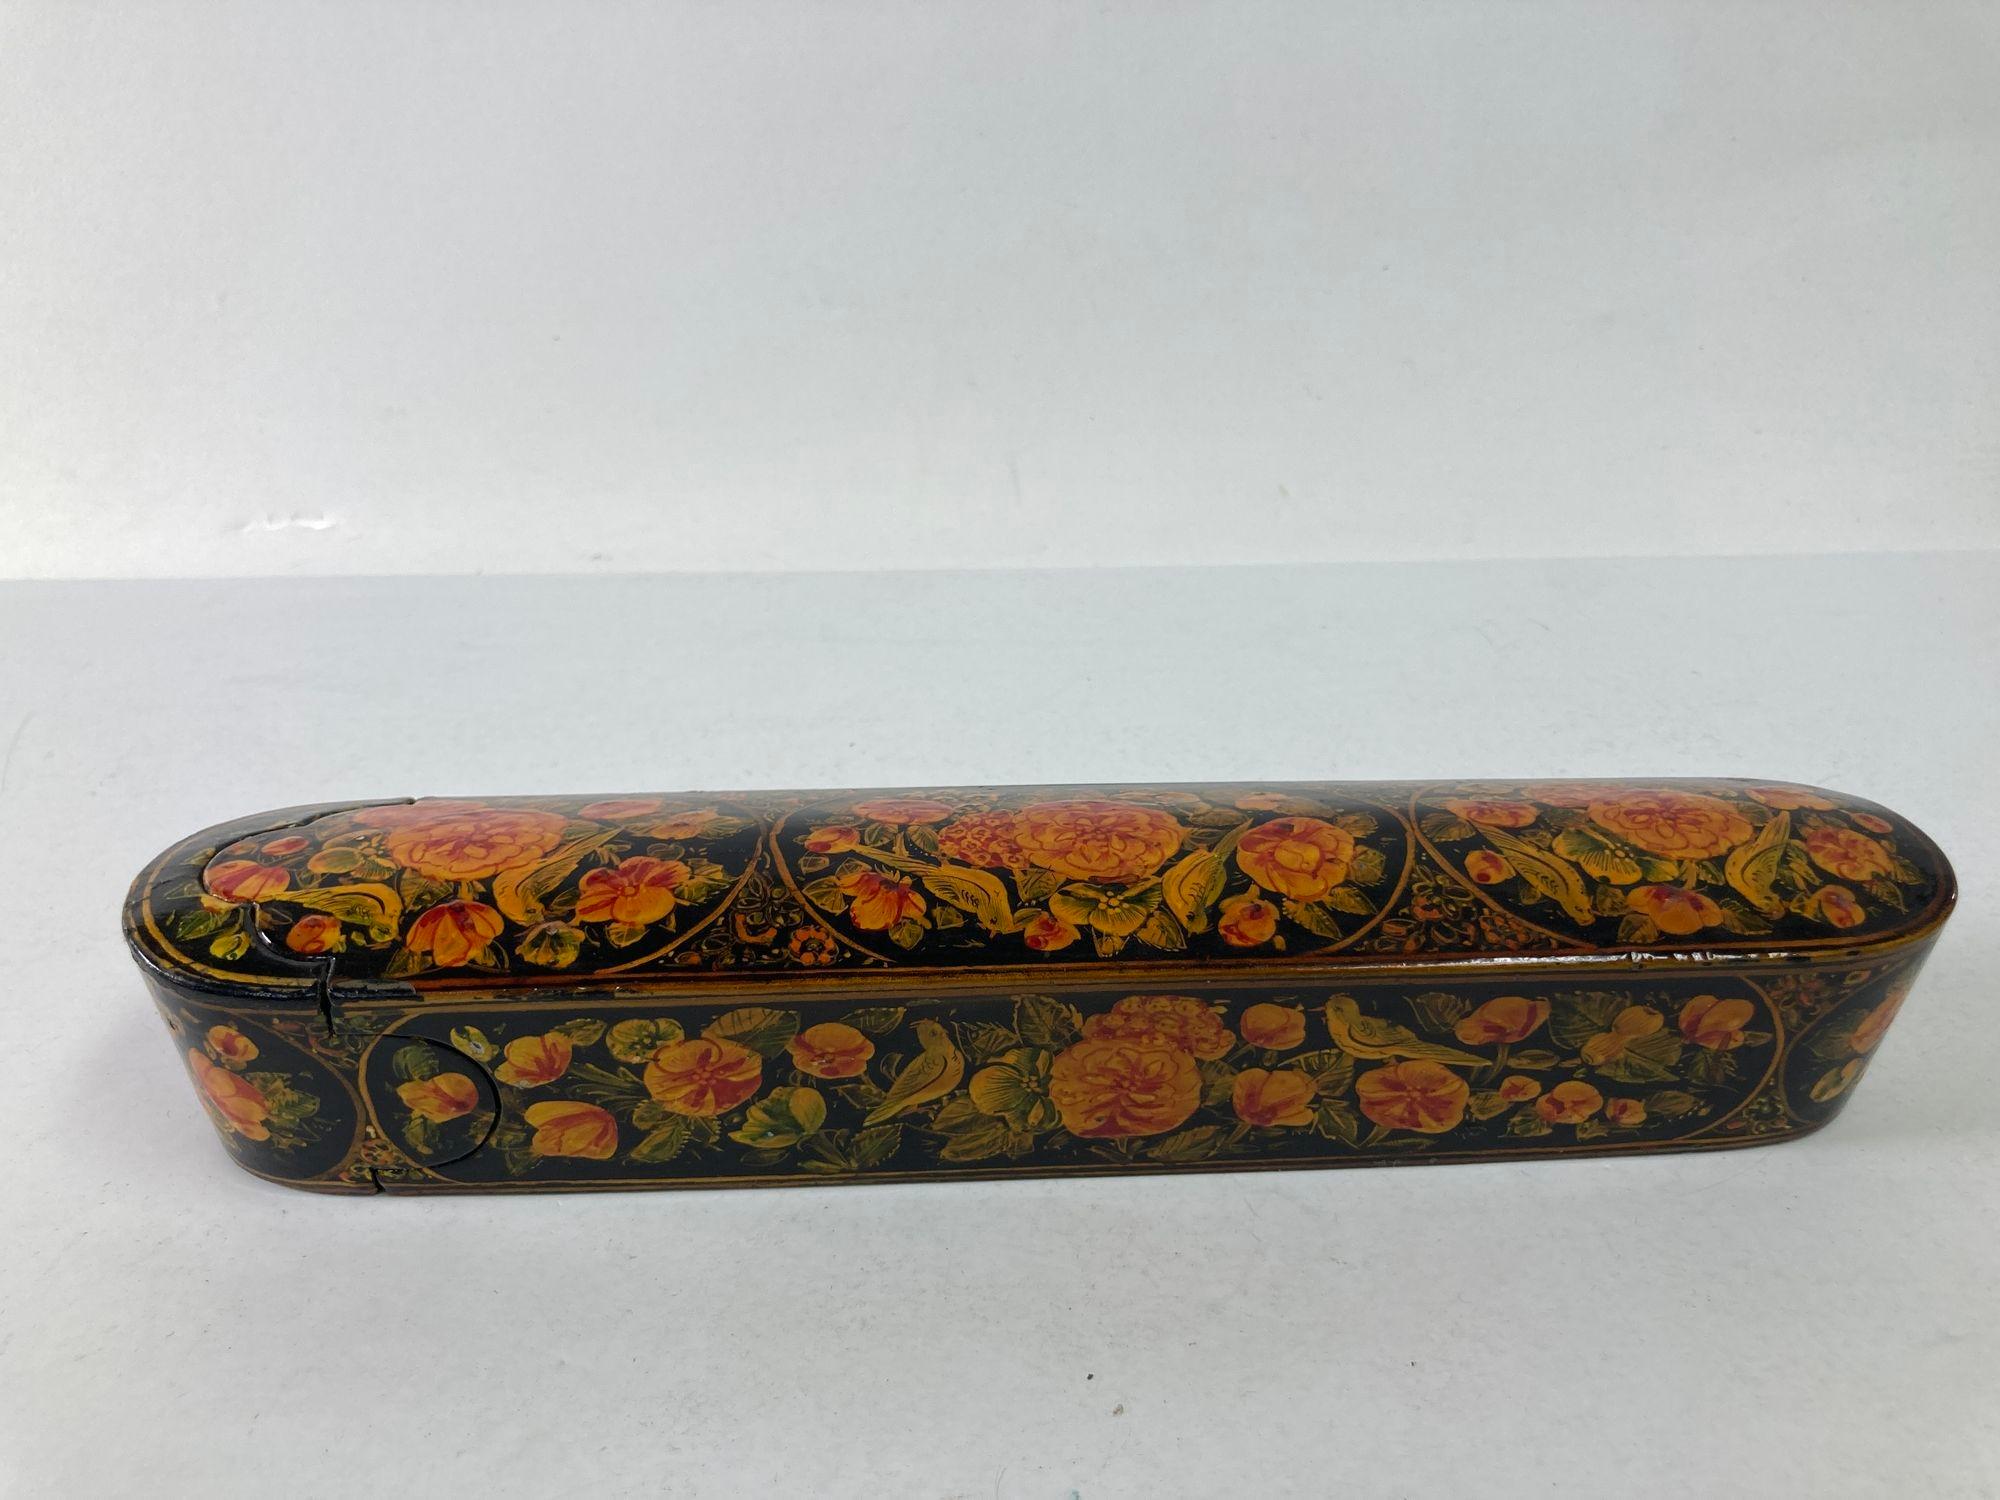 Persian Qajar Lacquer pen box Hand Painted with floral and birds design.
Indo Persian hand painted lacquer pen box in elongated oval shape.
A beautifully decorated scabs pen was on paper mâché, with flowers and birds. 
The pen box is made of two